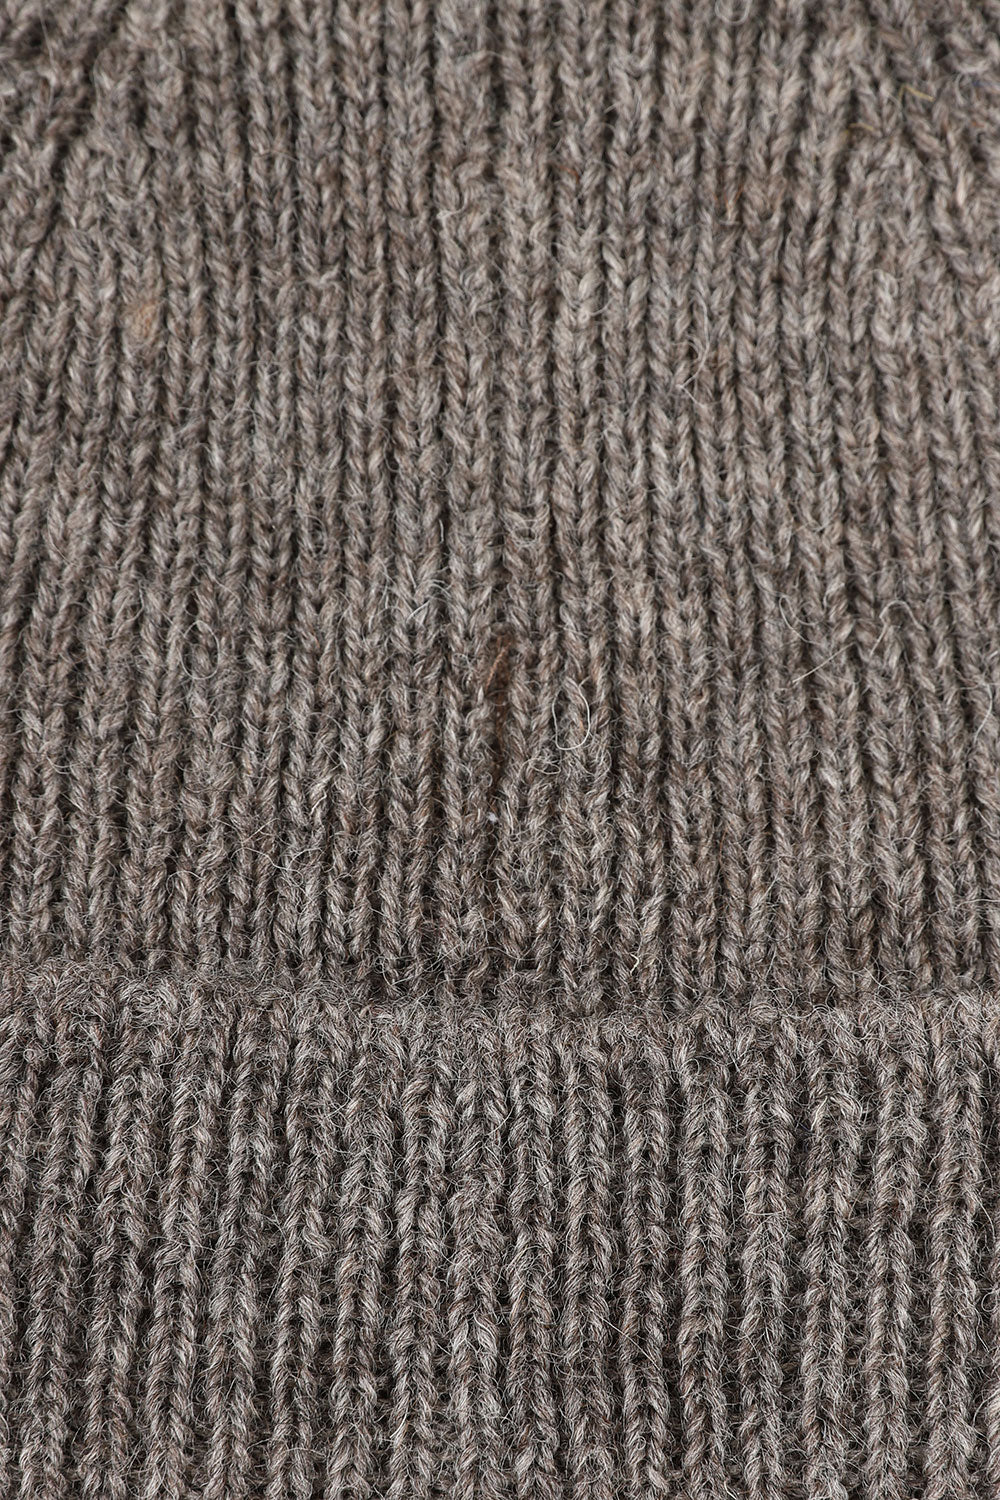 Close-up view of Uskees 4005 'rye' greyish coloured wool hat, showing the texture of the Bluefaced Leicester and Masham wool blend.